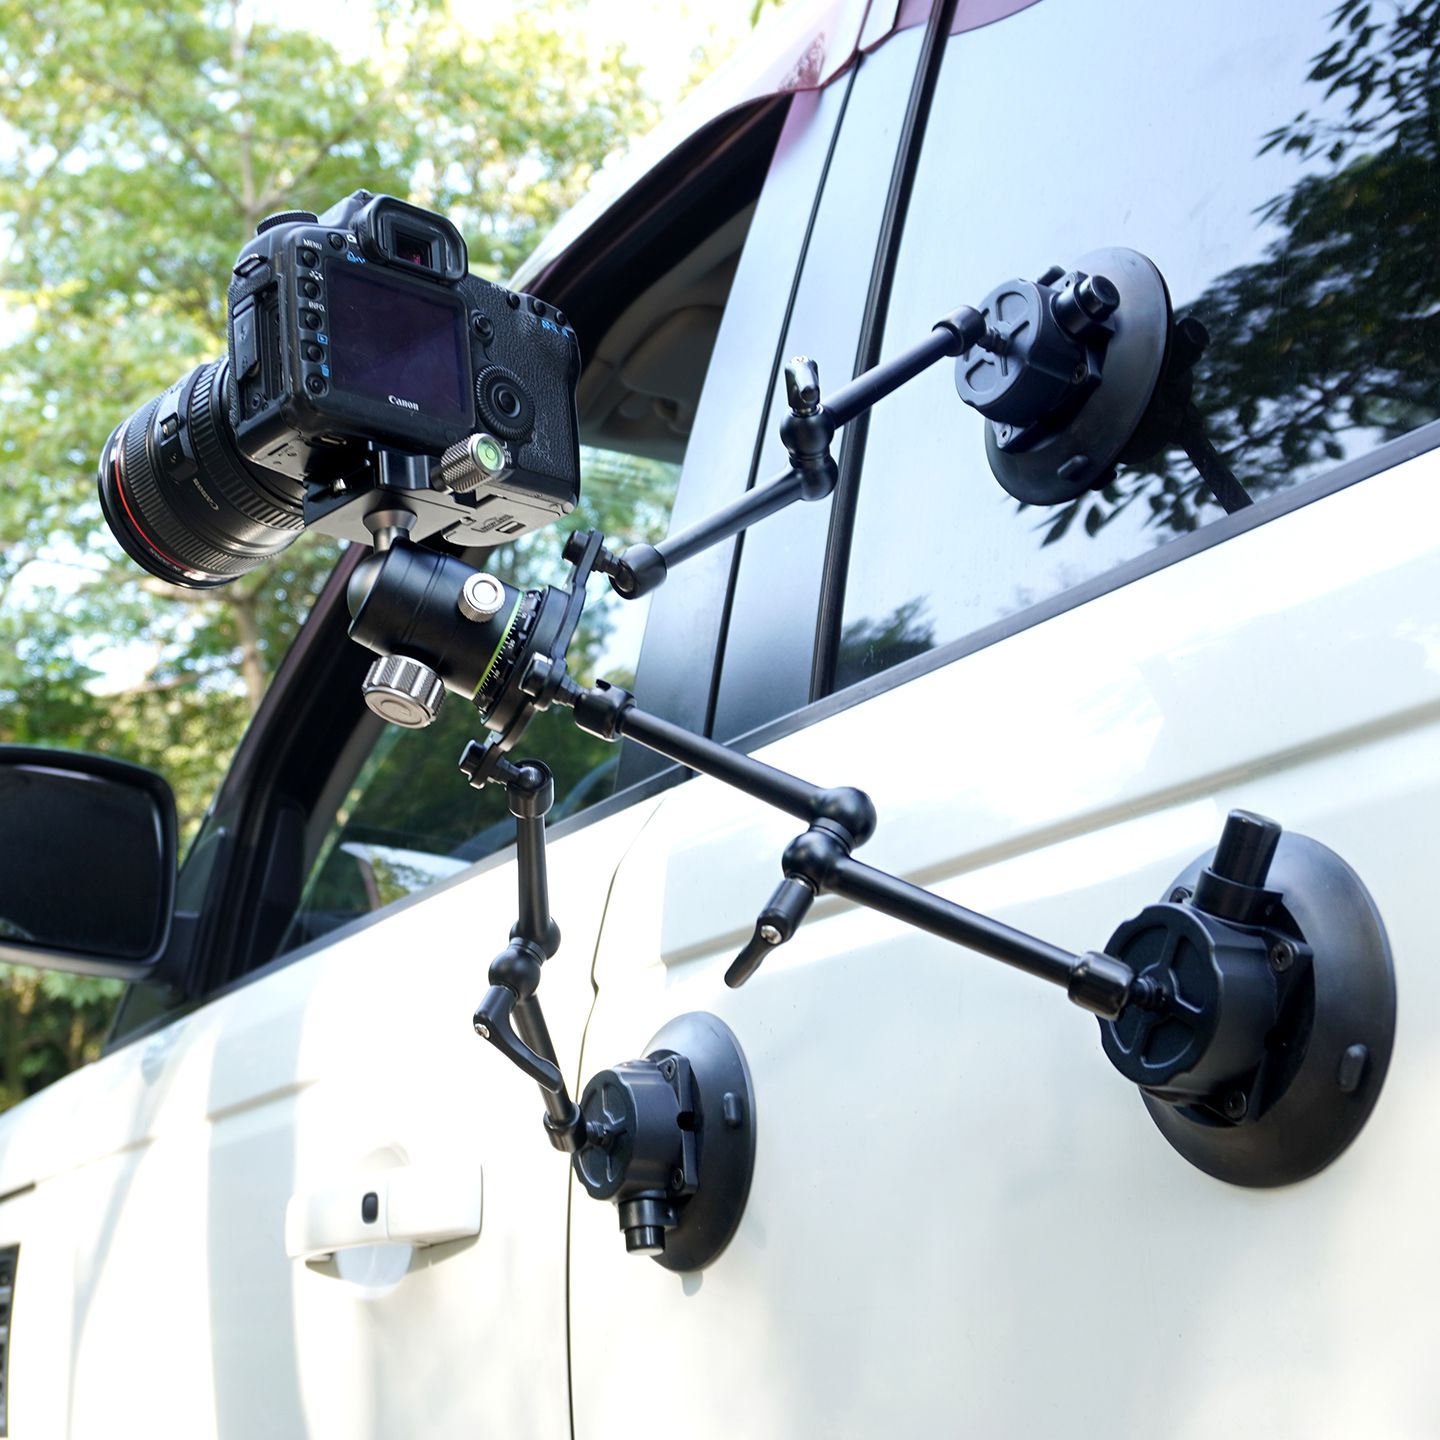 http://suctioncup-mount.com/products/4-1-magic-arm-suction-cup-camera-mount_03.jpg